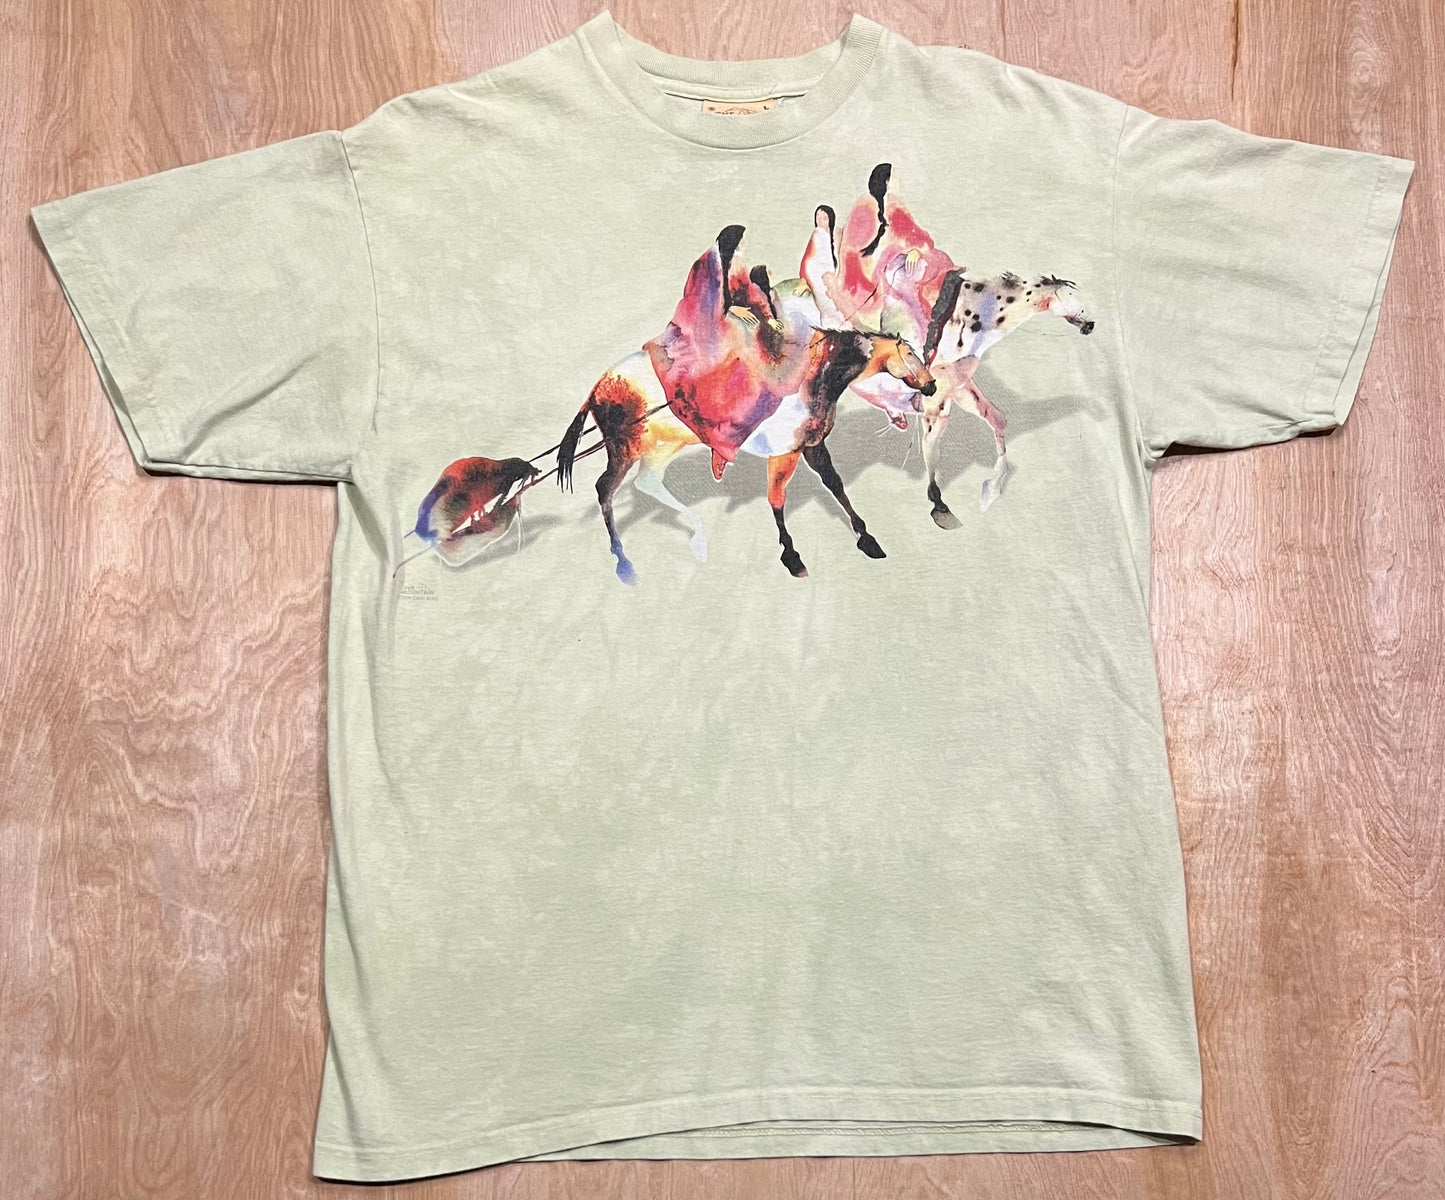 2000 Carol Grigg's "Lost Tribes II" The Mountain T-Shirt